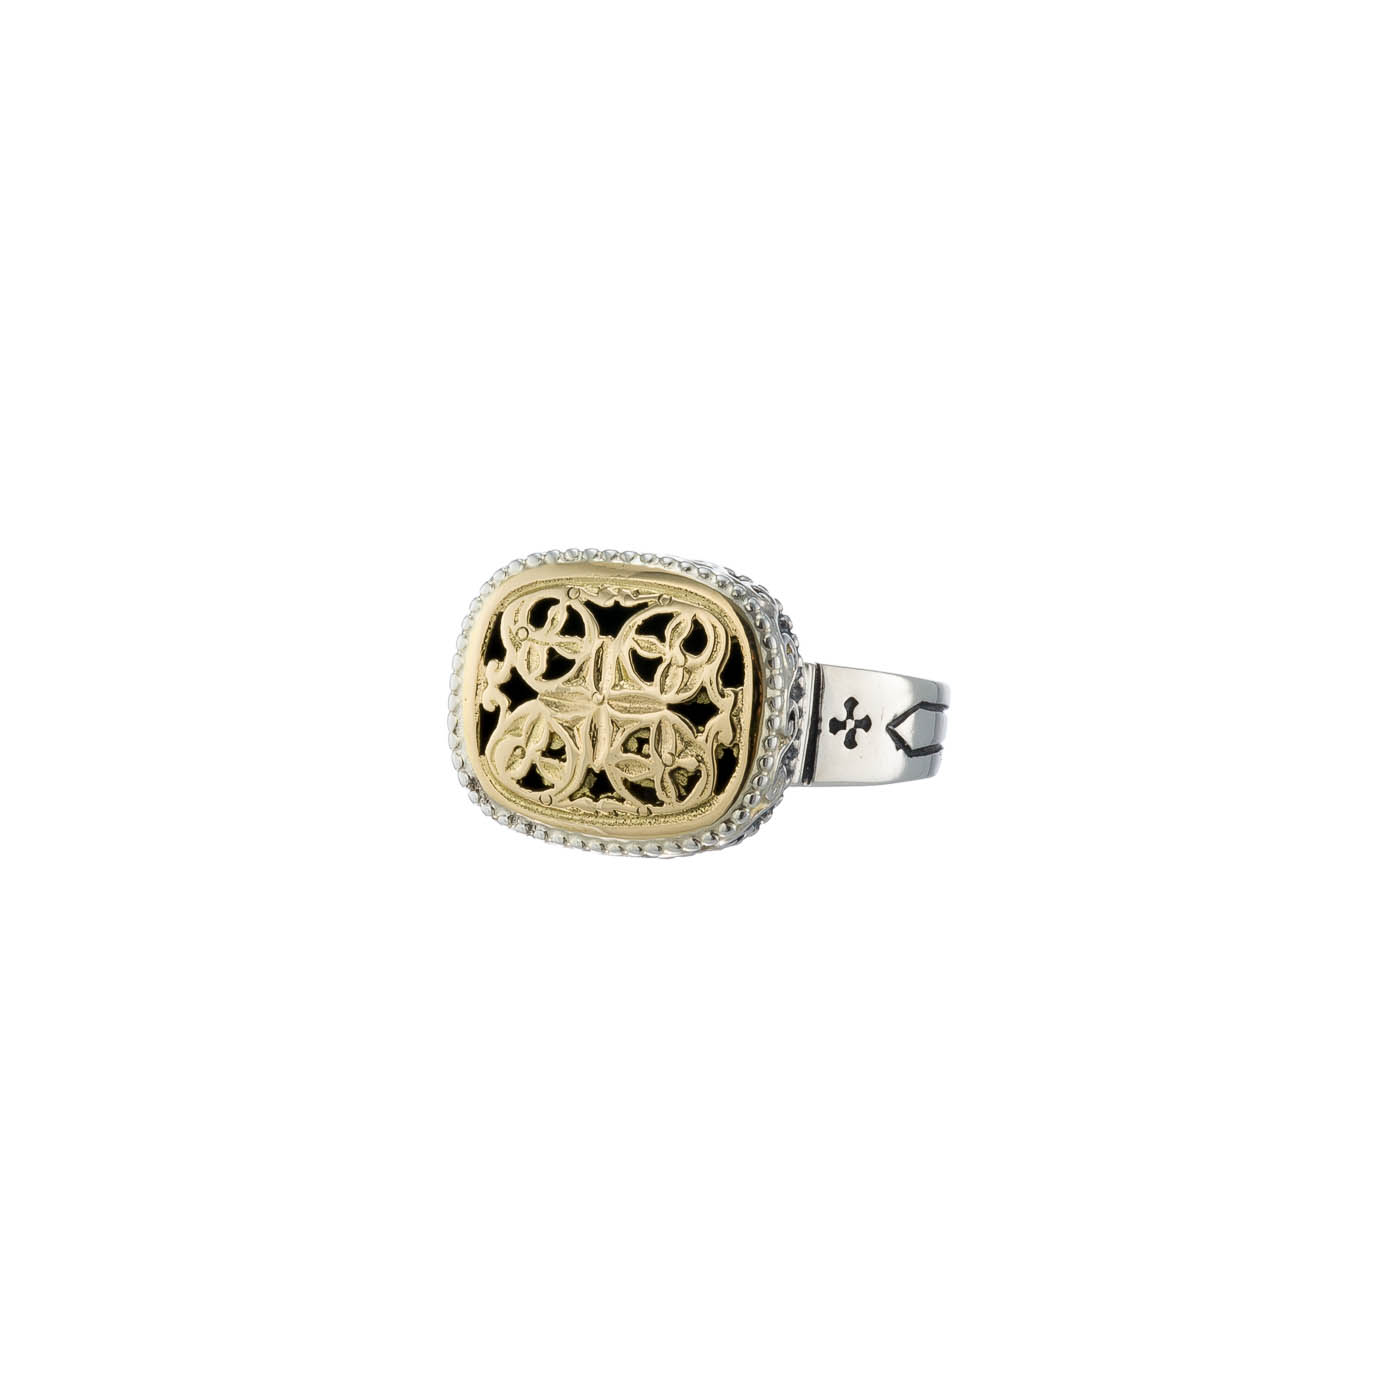 Garden shadows cushion ring in 18K Gold and Sterling Silver